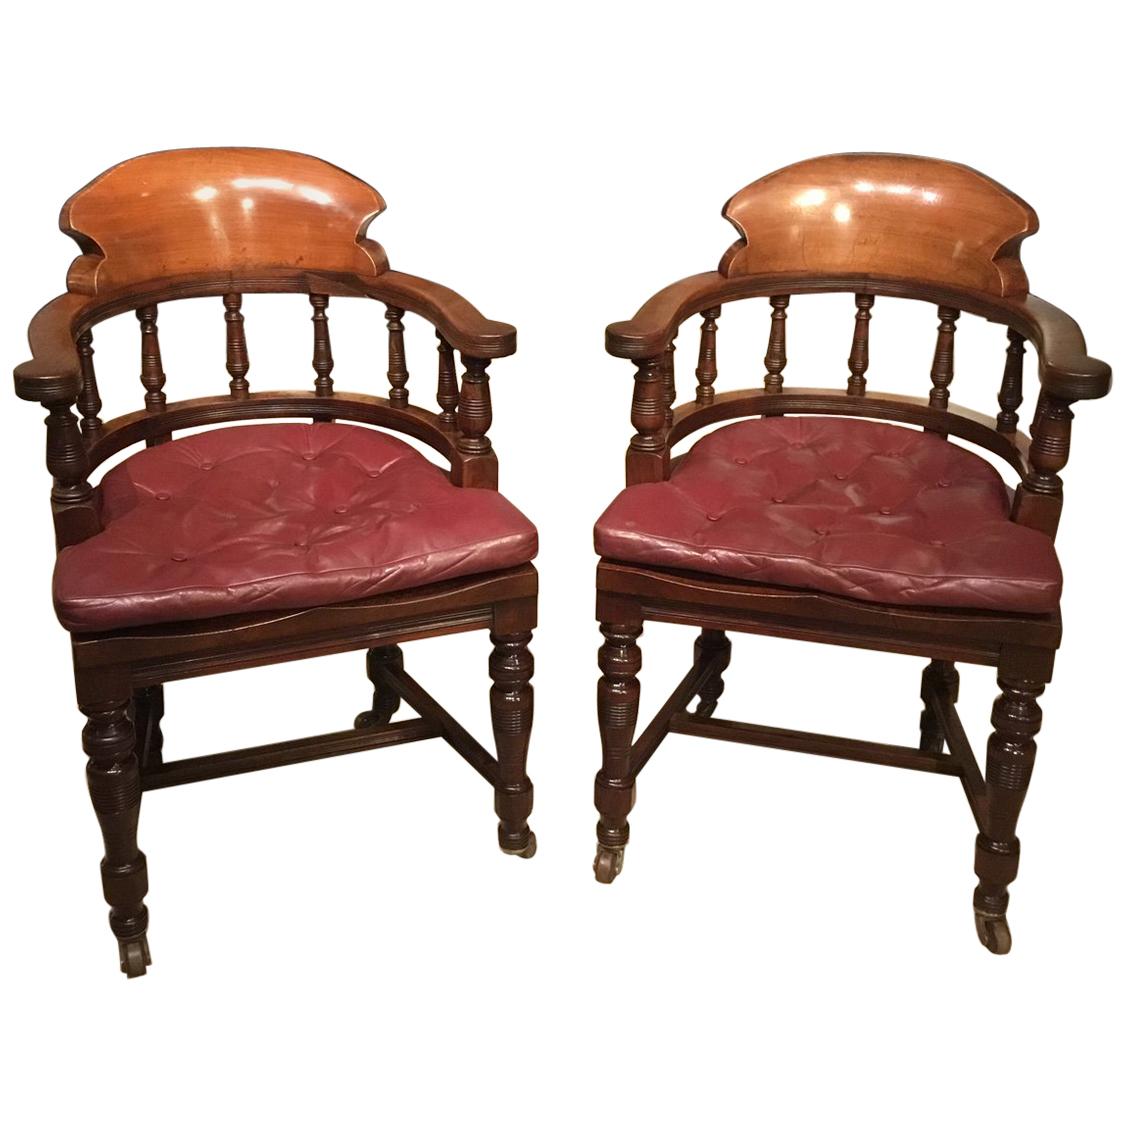 Pair of High Quality Mahogany Late Victorian Period Desk Armchairs For Sale